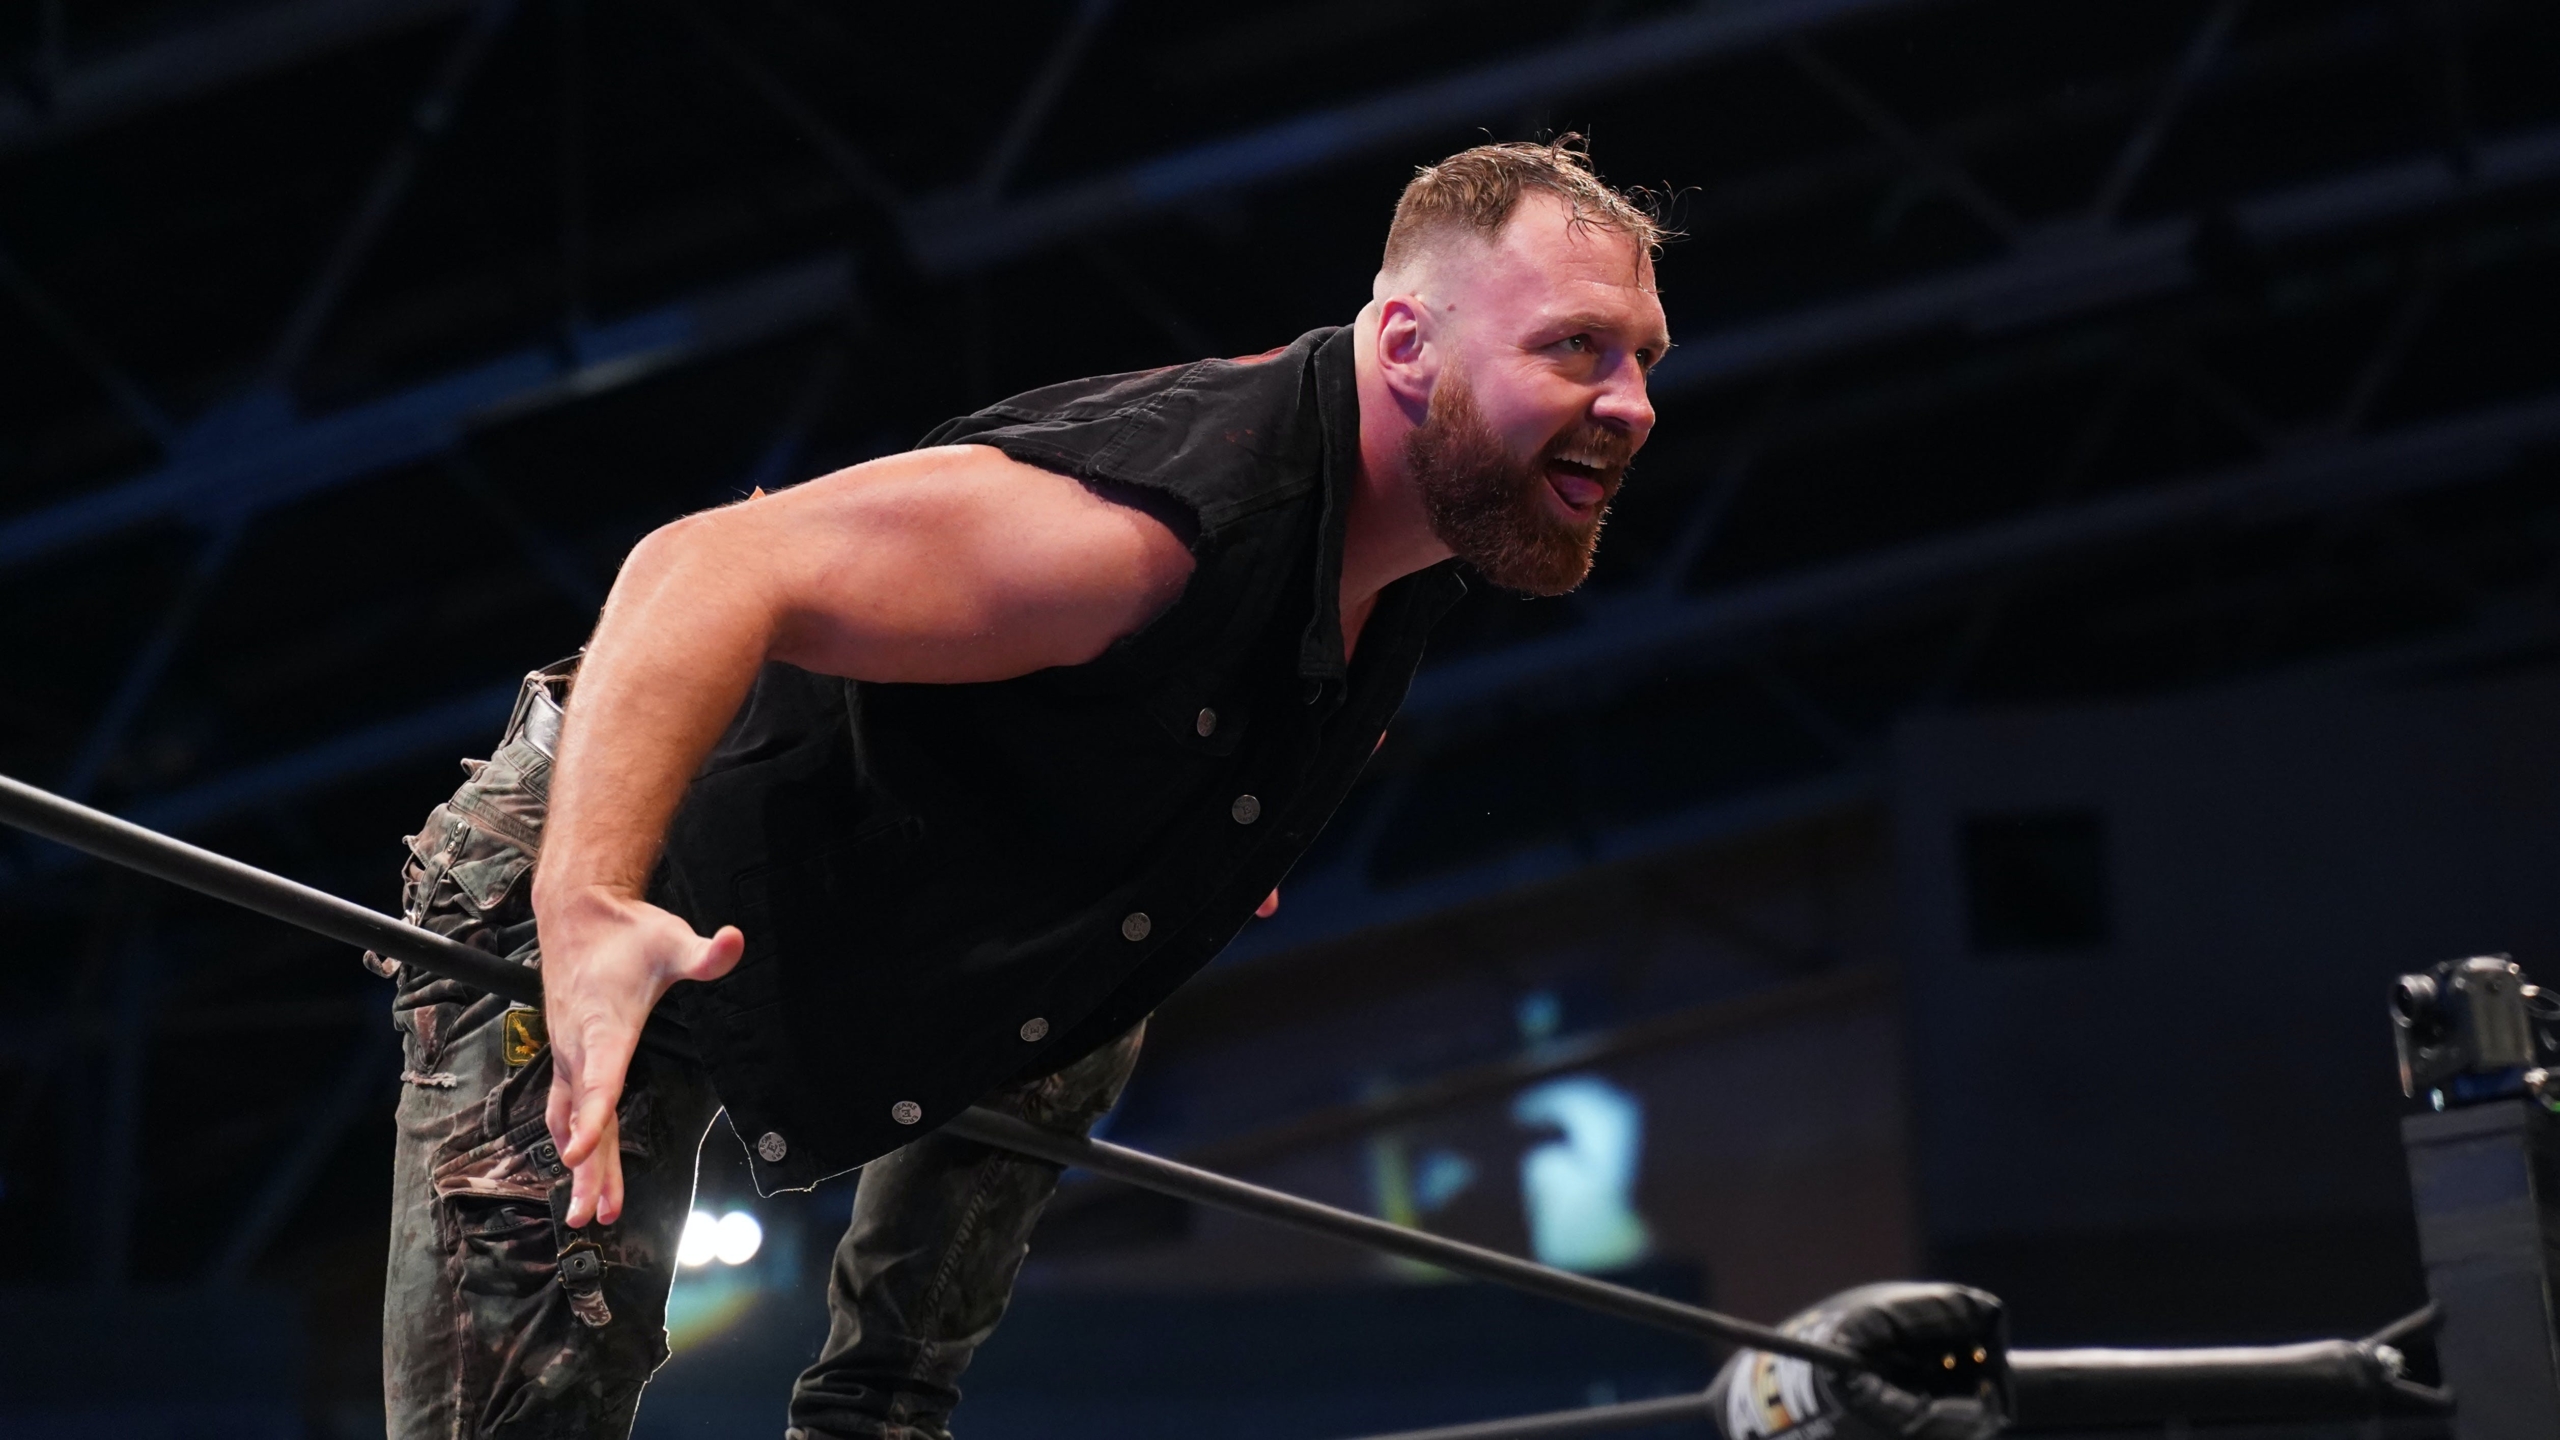 Jon Moxley has an excellent track record as the AEW Champ